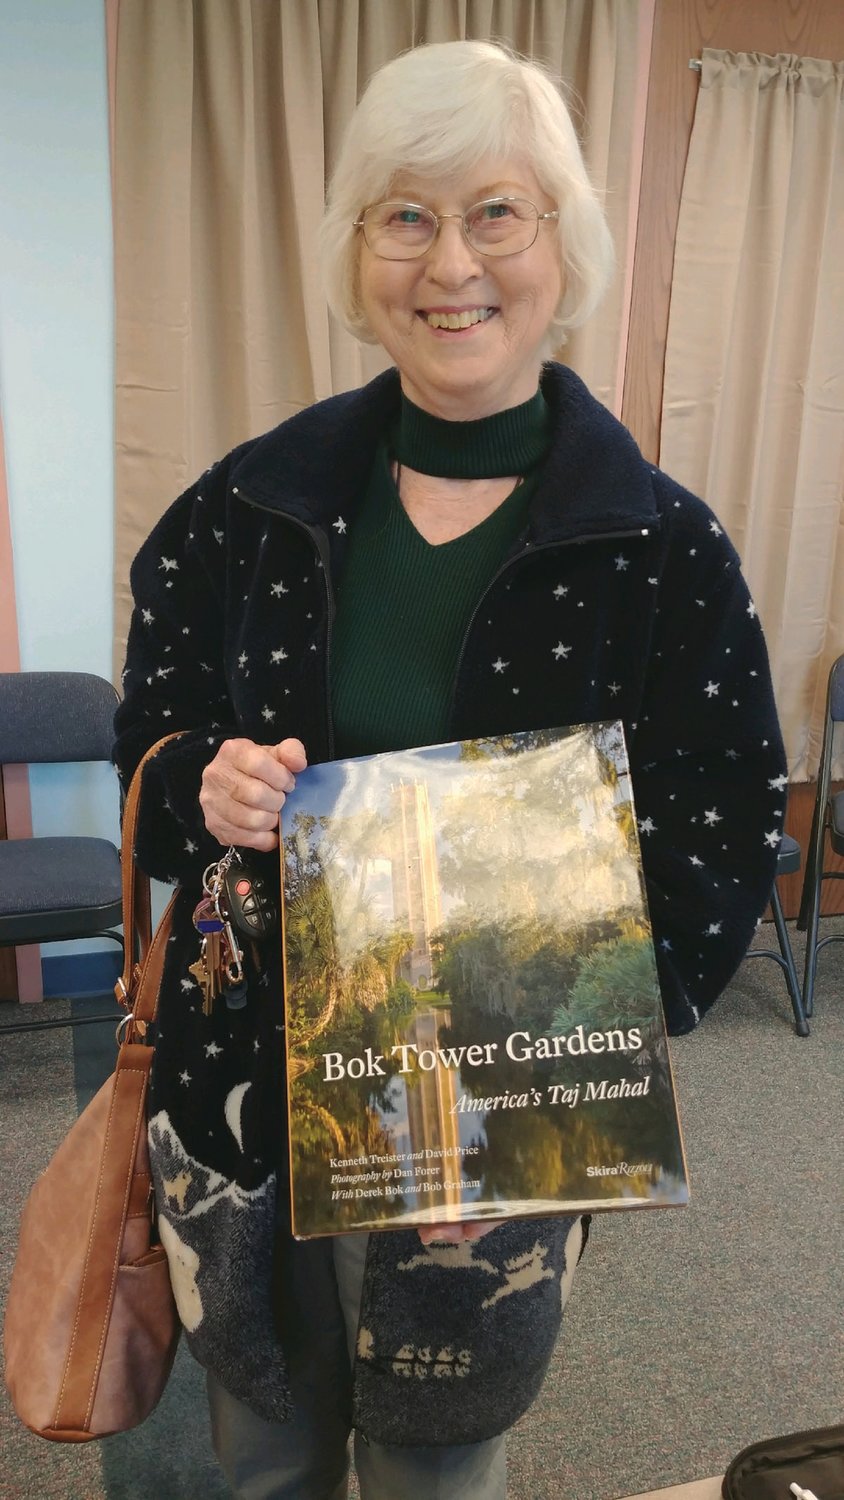 Becky Rawls who was presented the first book in November 2019 in memory of her husband.